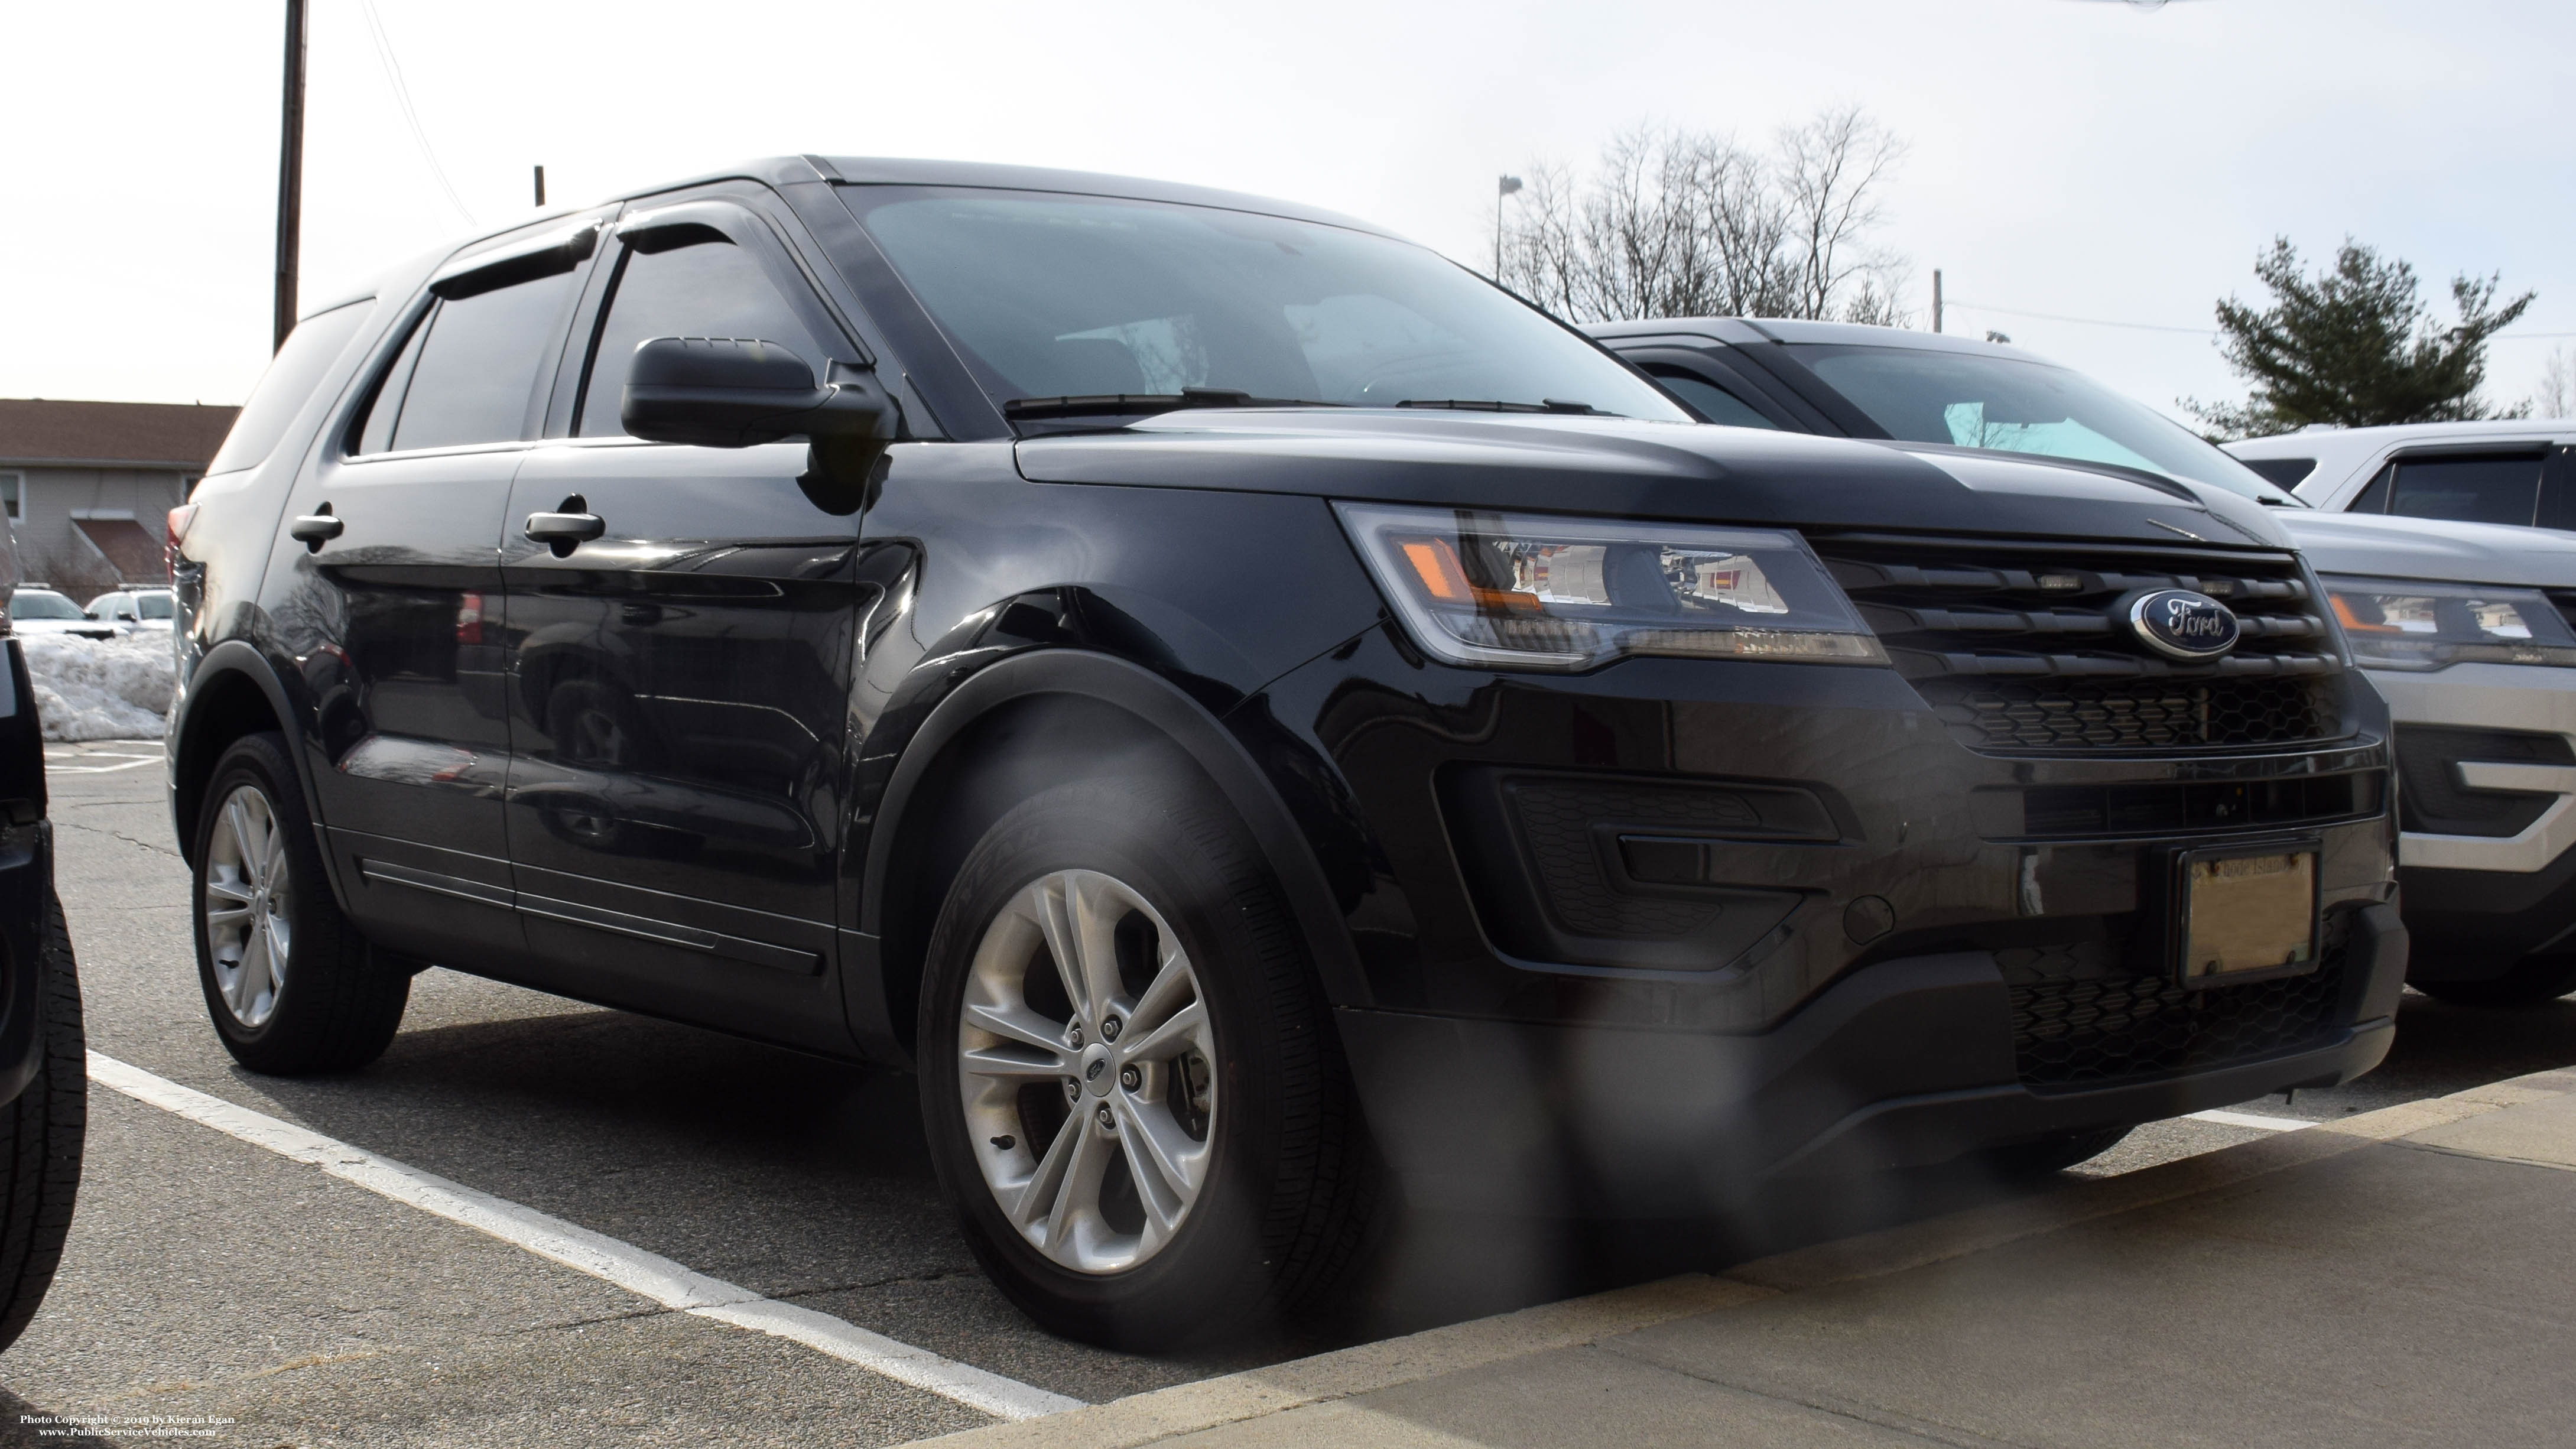 A photo  of North Kingstown Police
            Unmarked Unit, a 2018 Ford Police Interceptor Utility             taken by Kieran Egan